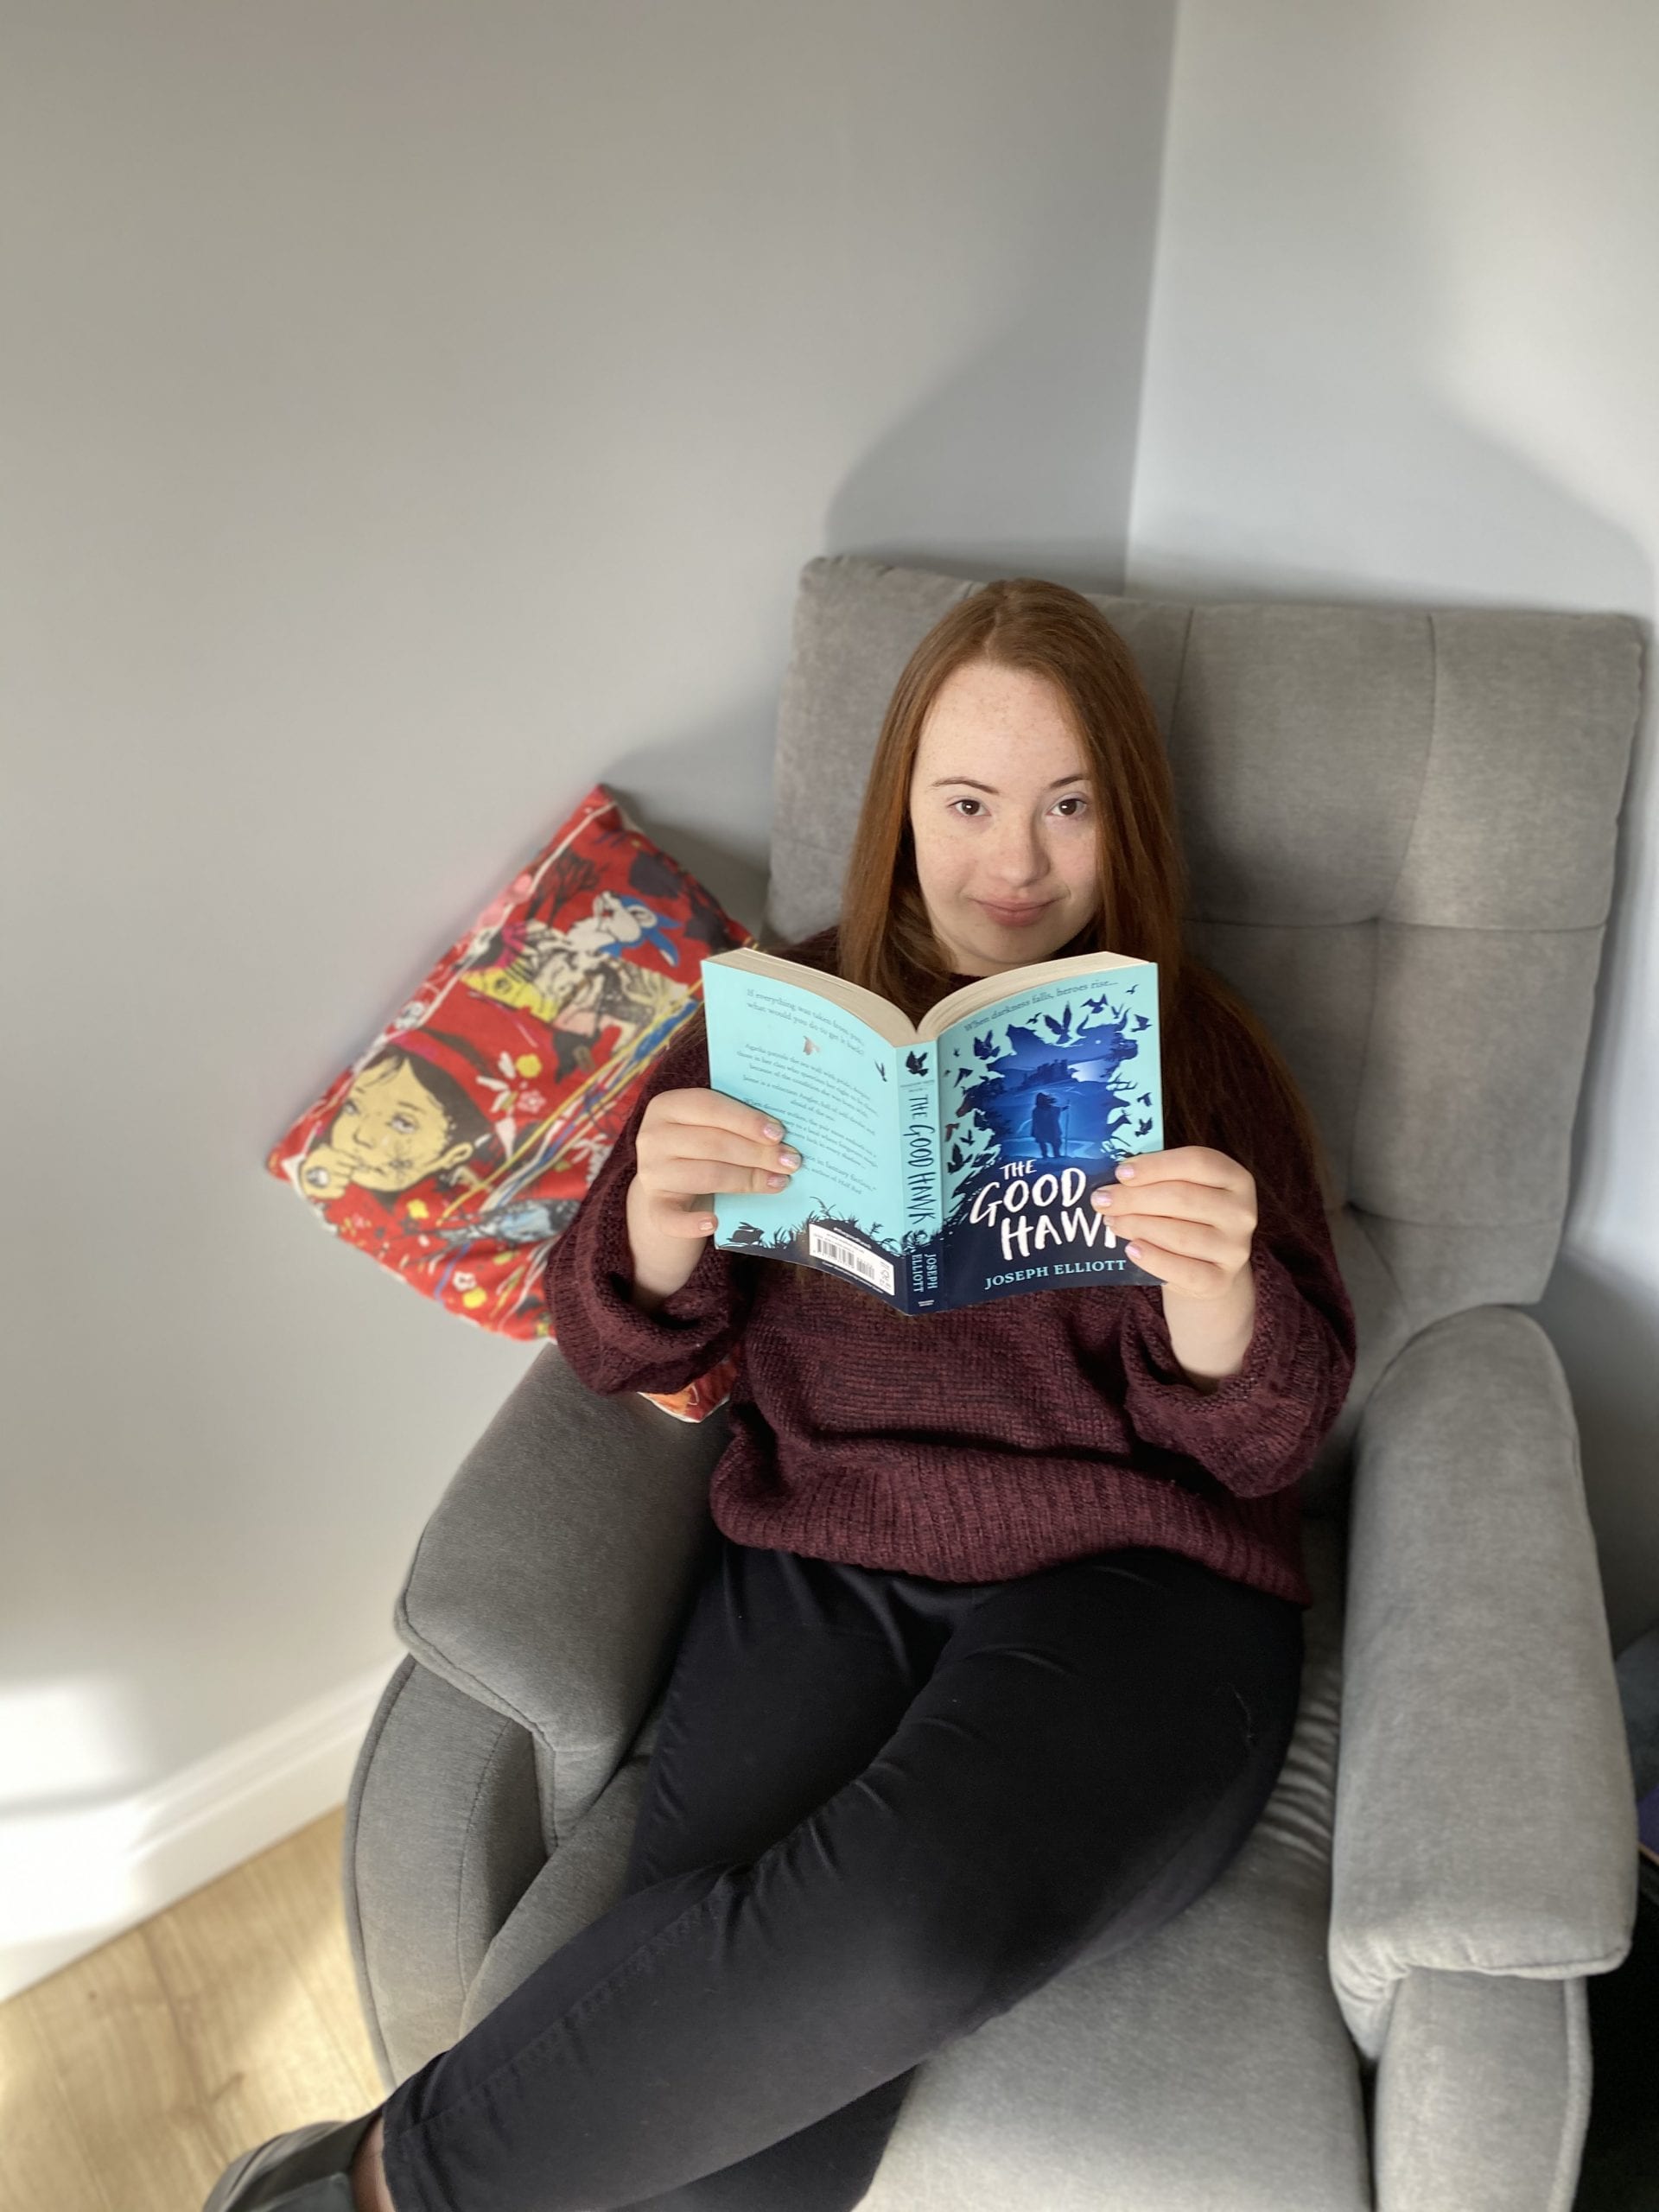 A woman sits in a grey easy chair holding an open paperback book. She is looking at the camera. The young woman has Down's syndrome